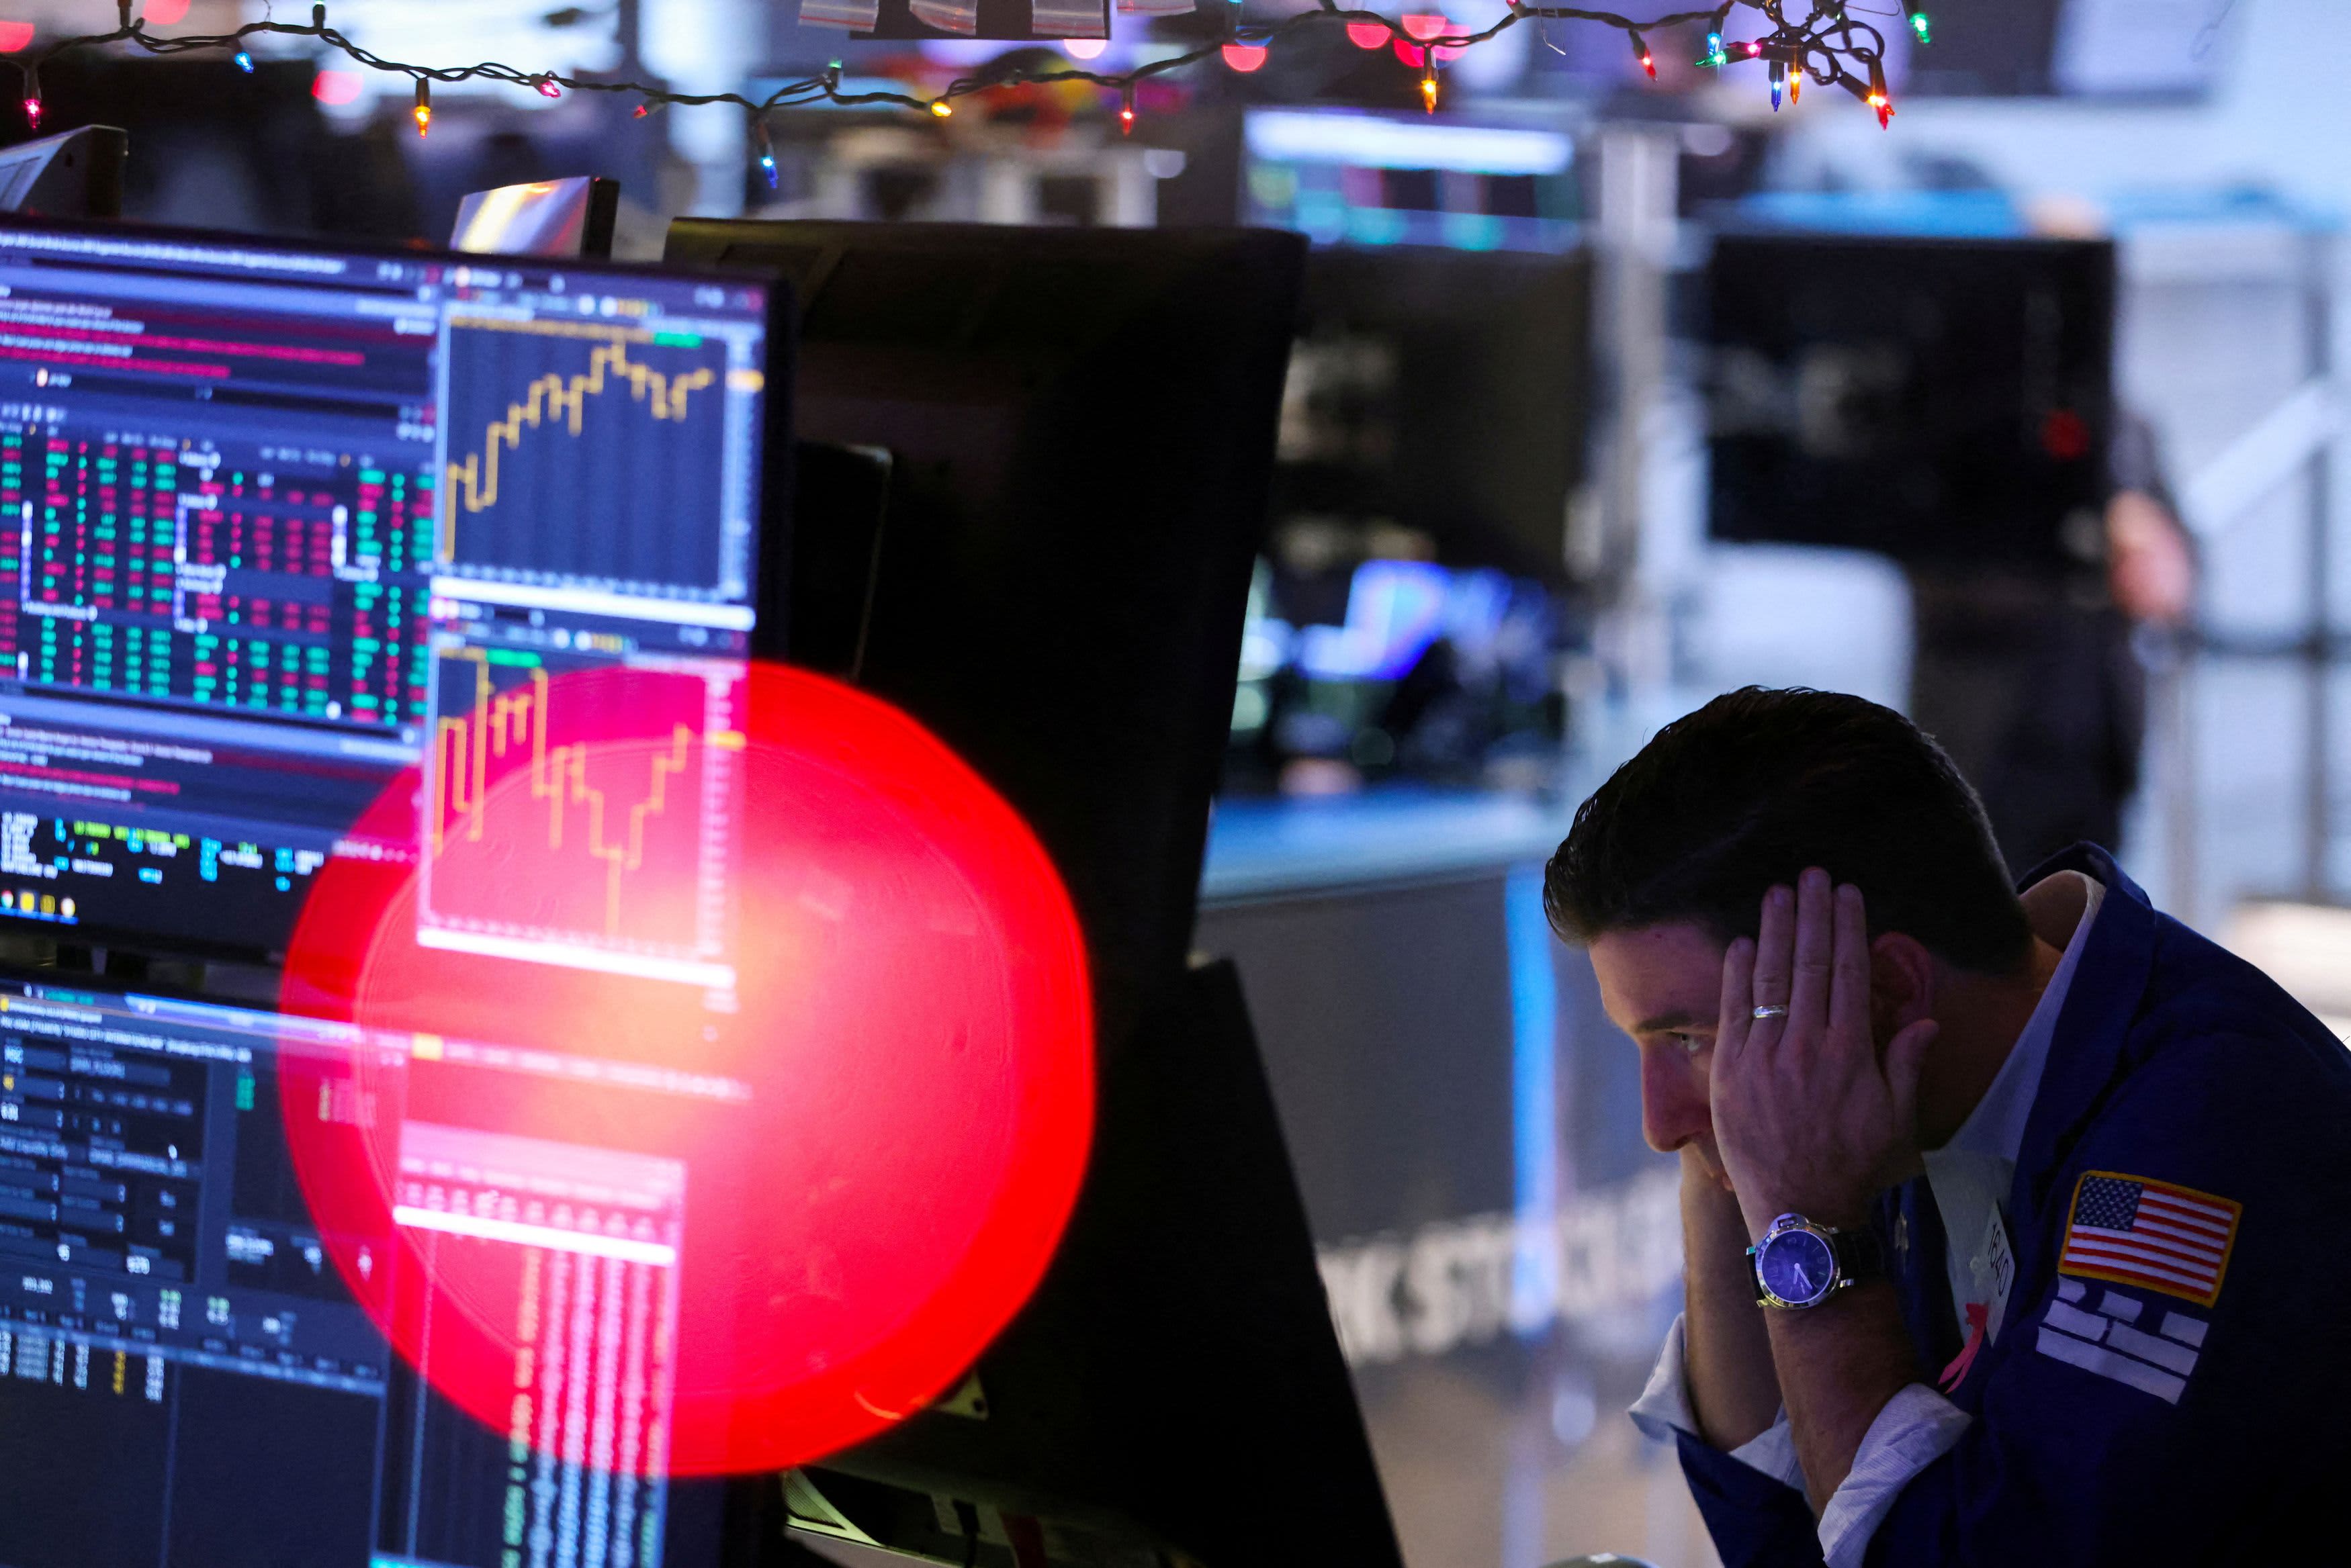 Negative mood could pervade market next week as investors search for stability before the holidays